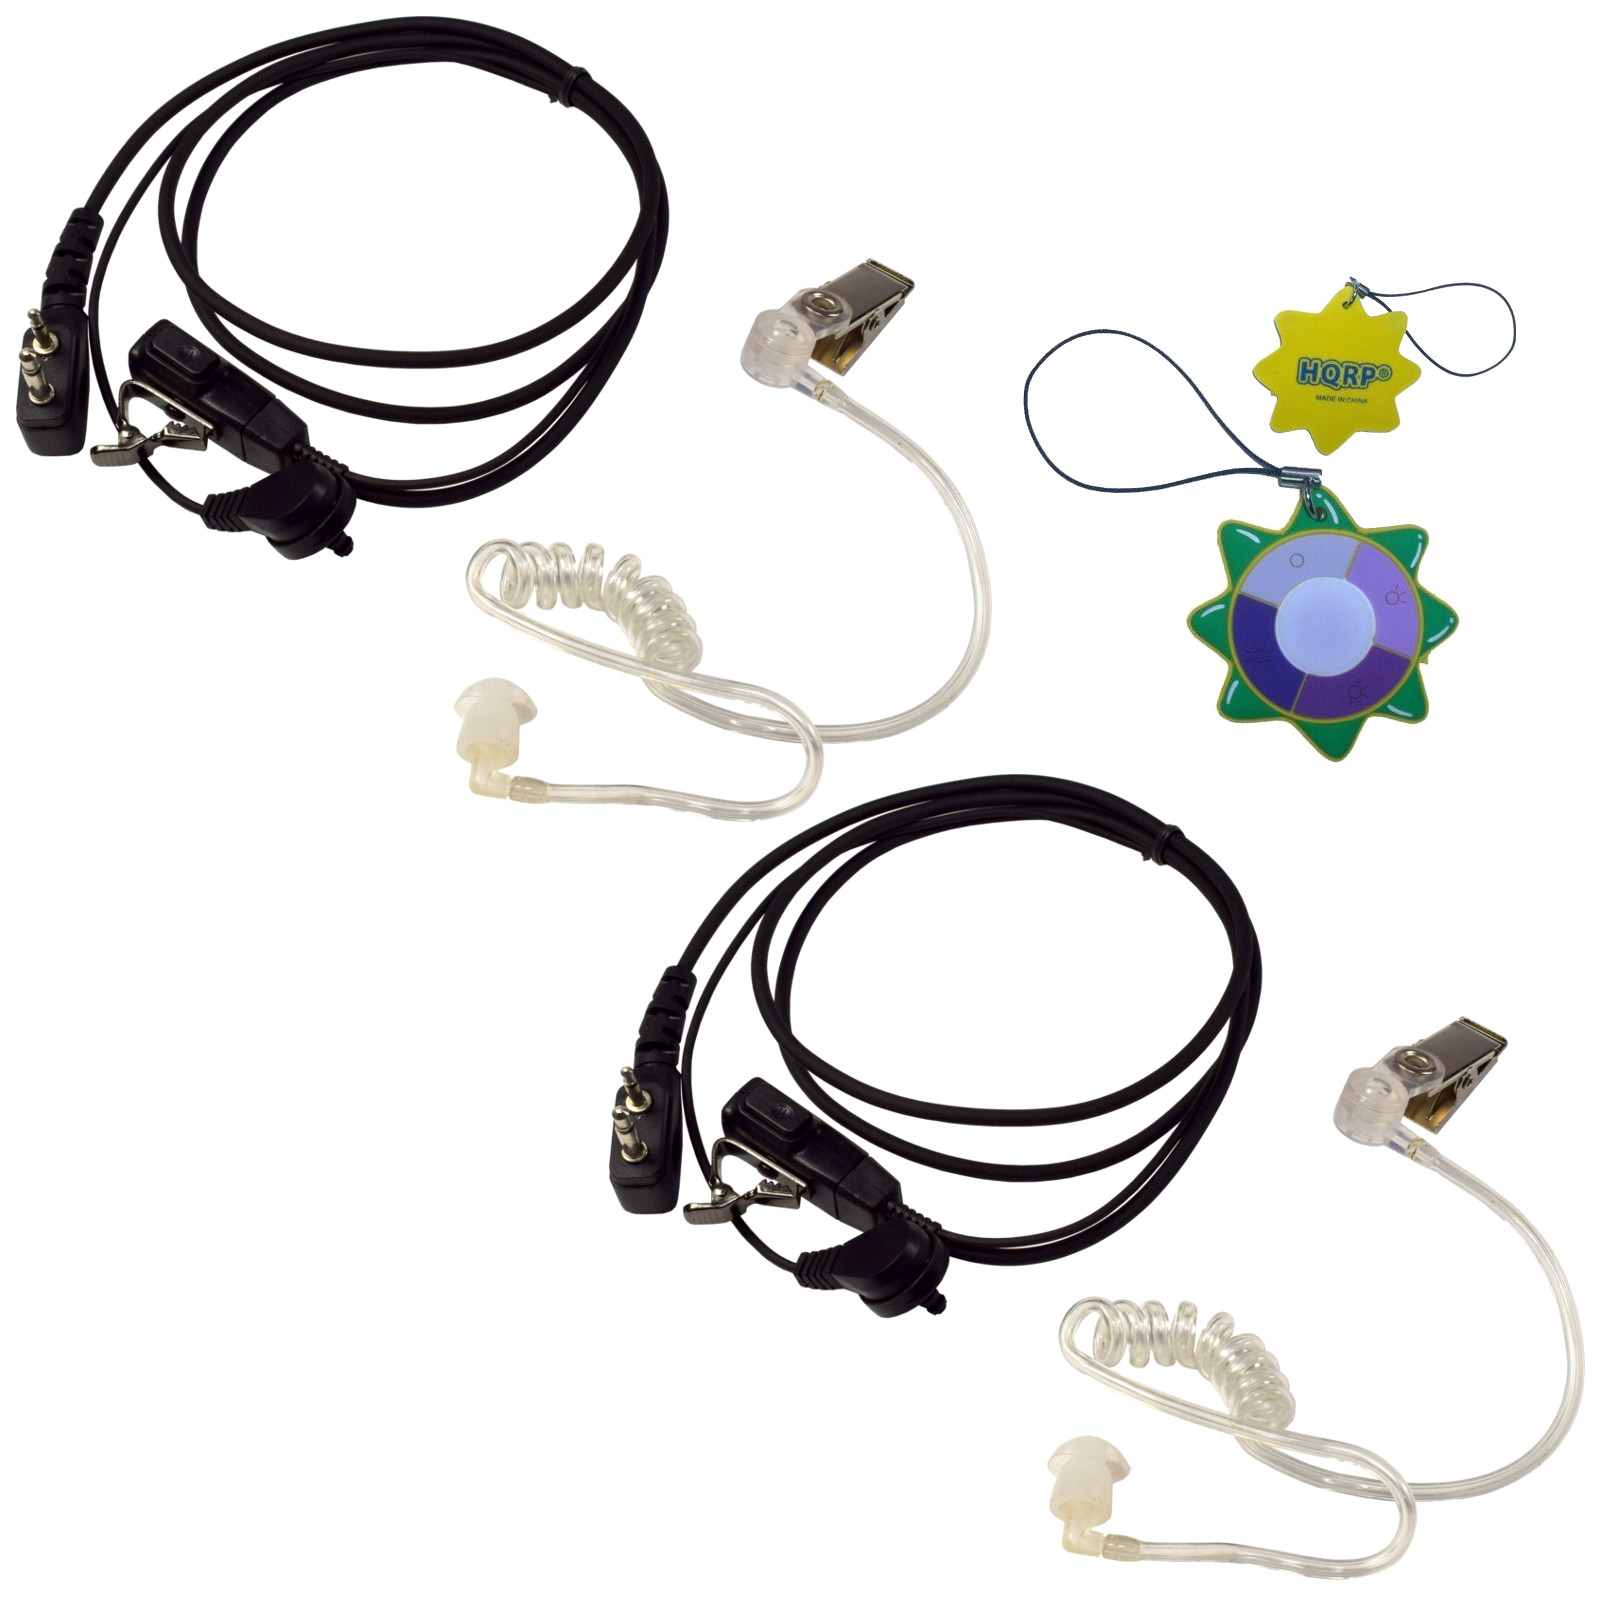 HQRP 2-pack Pin Headsets Acoustic Tube Earpiece Mic for ICOM IC-A20,  IC-A21, IC-A22, IC-A22(E), IC-A22E HQRP UV Meter